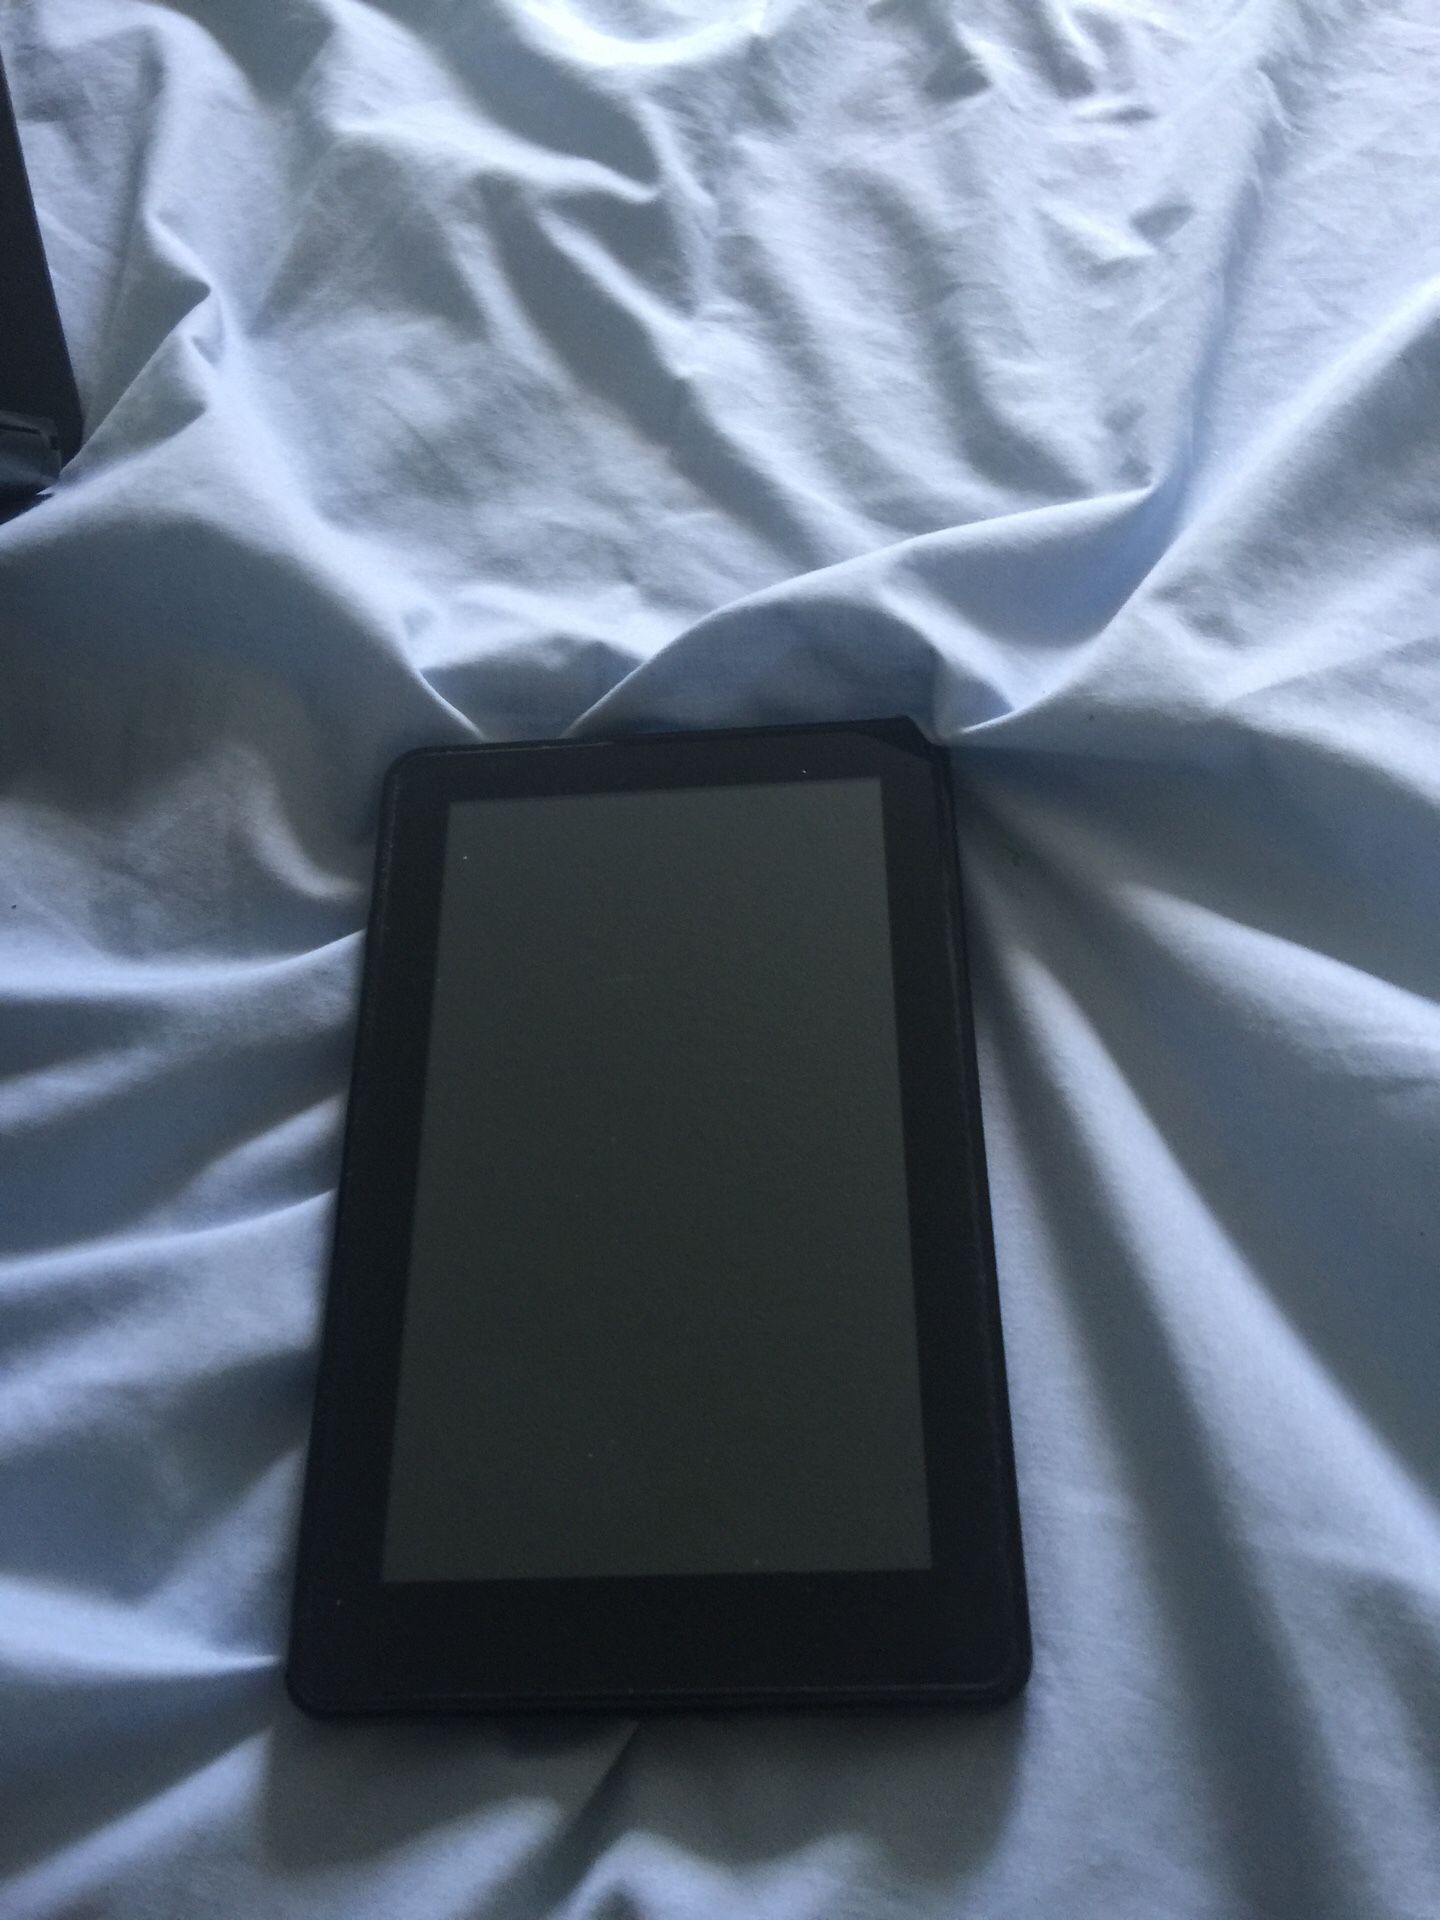 Kindle notebook